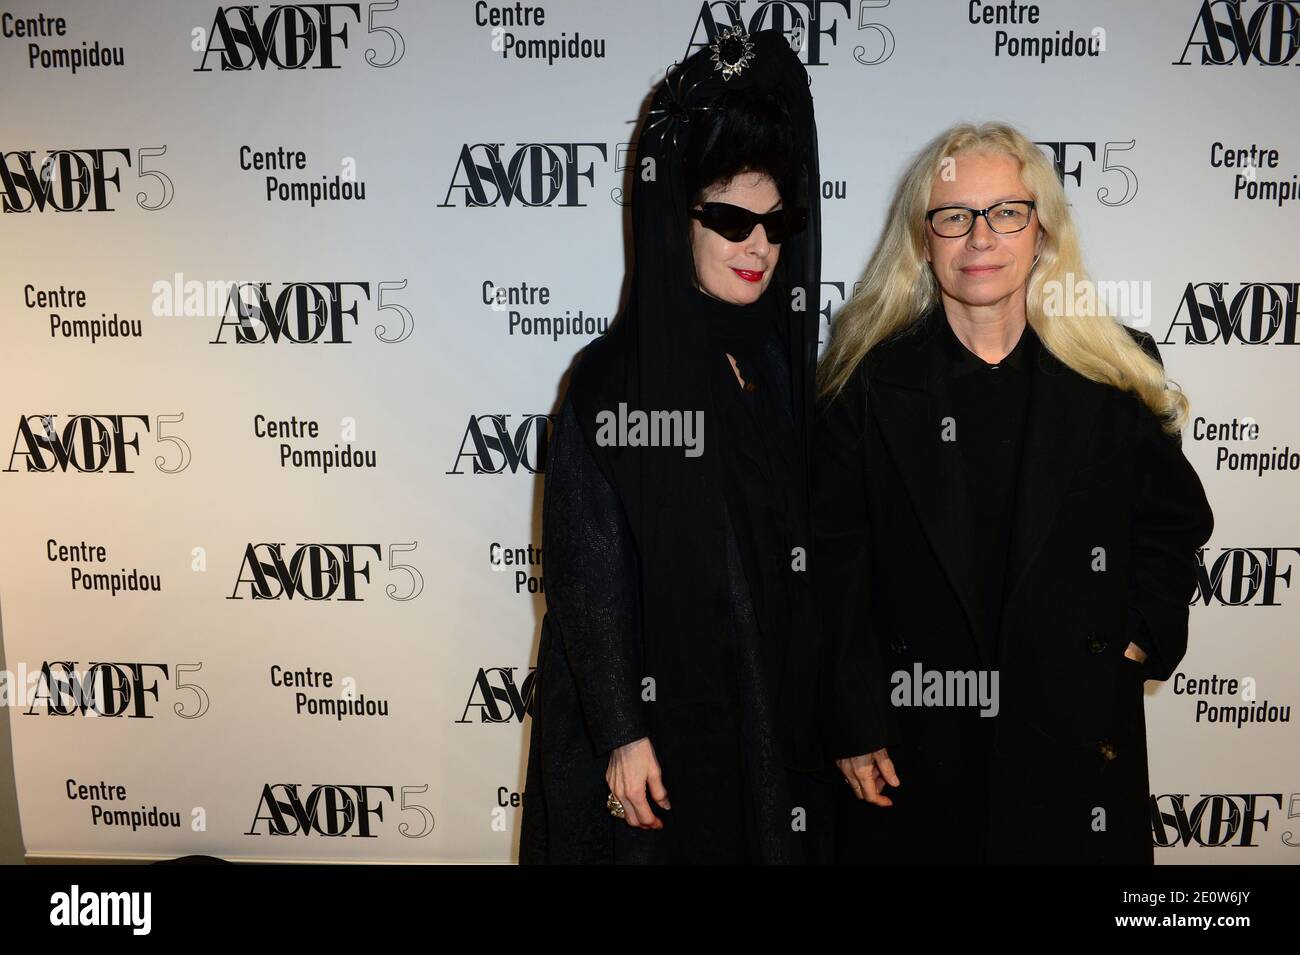 L-R : American blogger Diane Pernet and photographer Dominique Issermann seen at 'A Shaded View On Fashion Film' festival at Centre Pompidou, in Paris, France, on November 10, 2012. Photo by Ammar Abd Rabbo/ABACAPRESS.COM Stock Photo